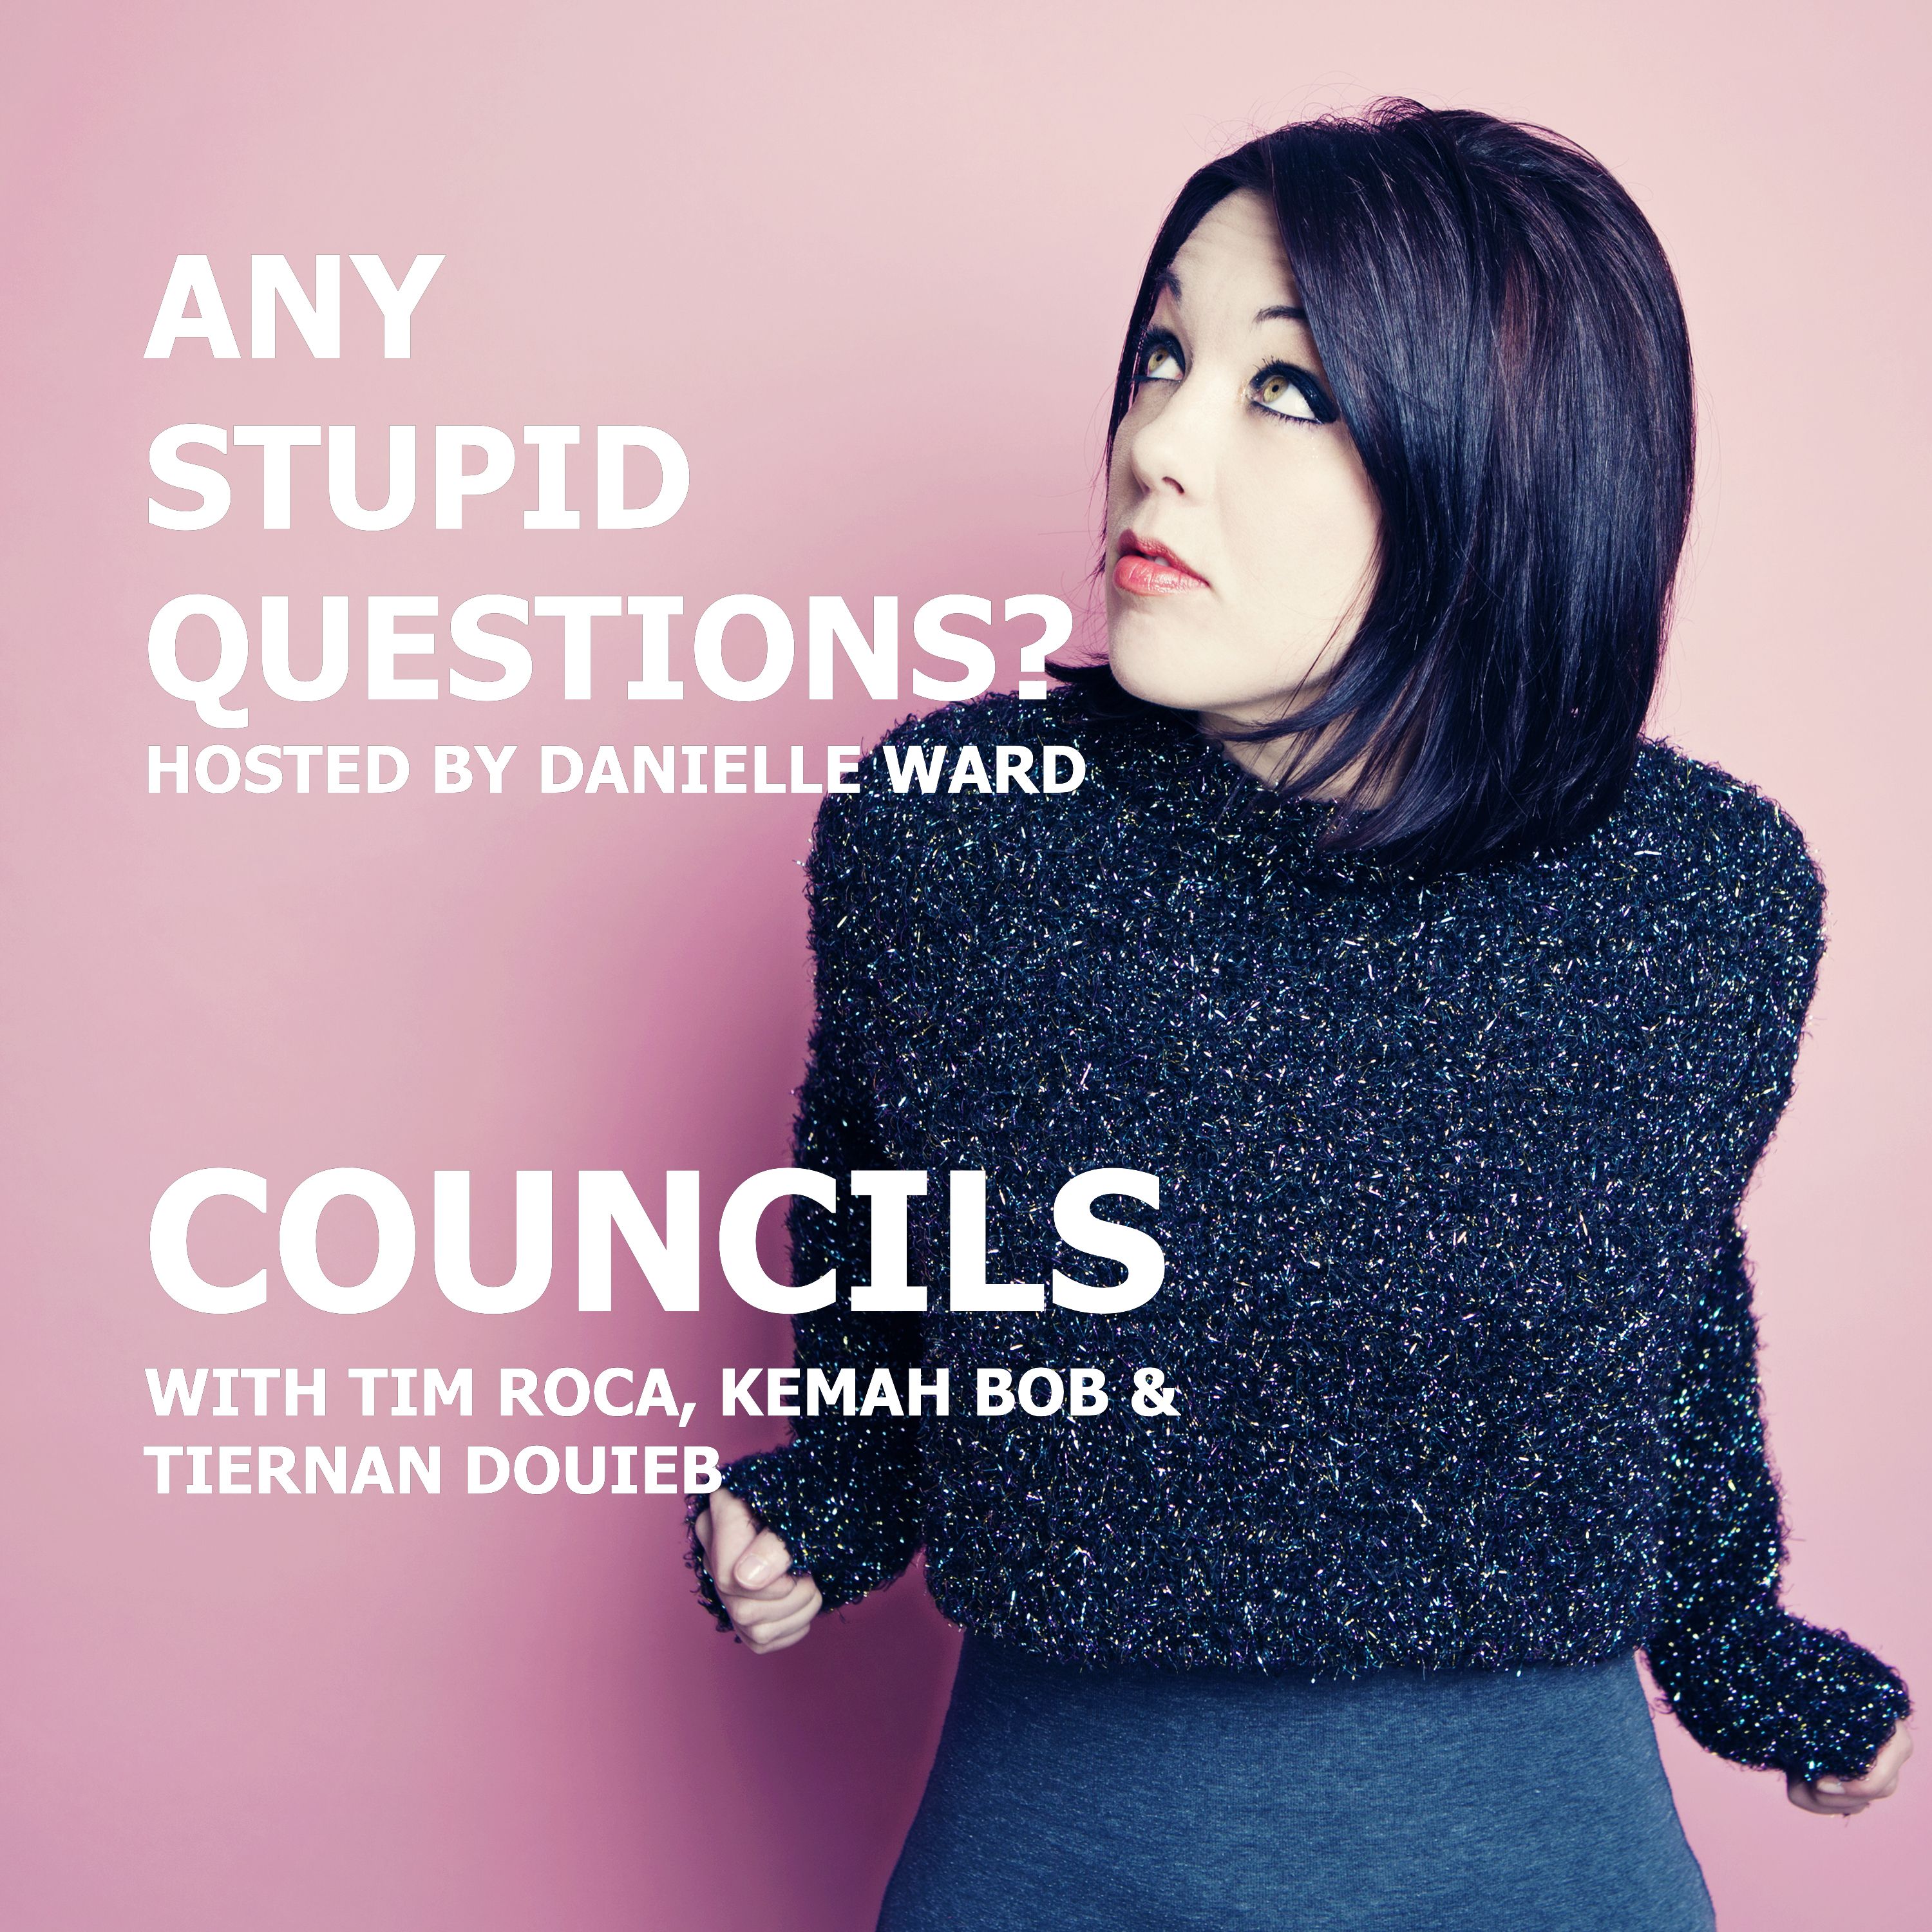 Any Stupid Questions about... Councils?